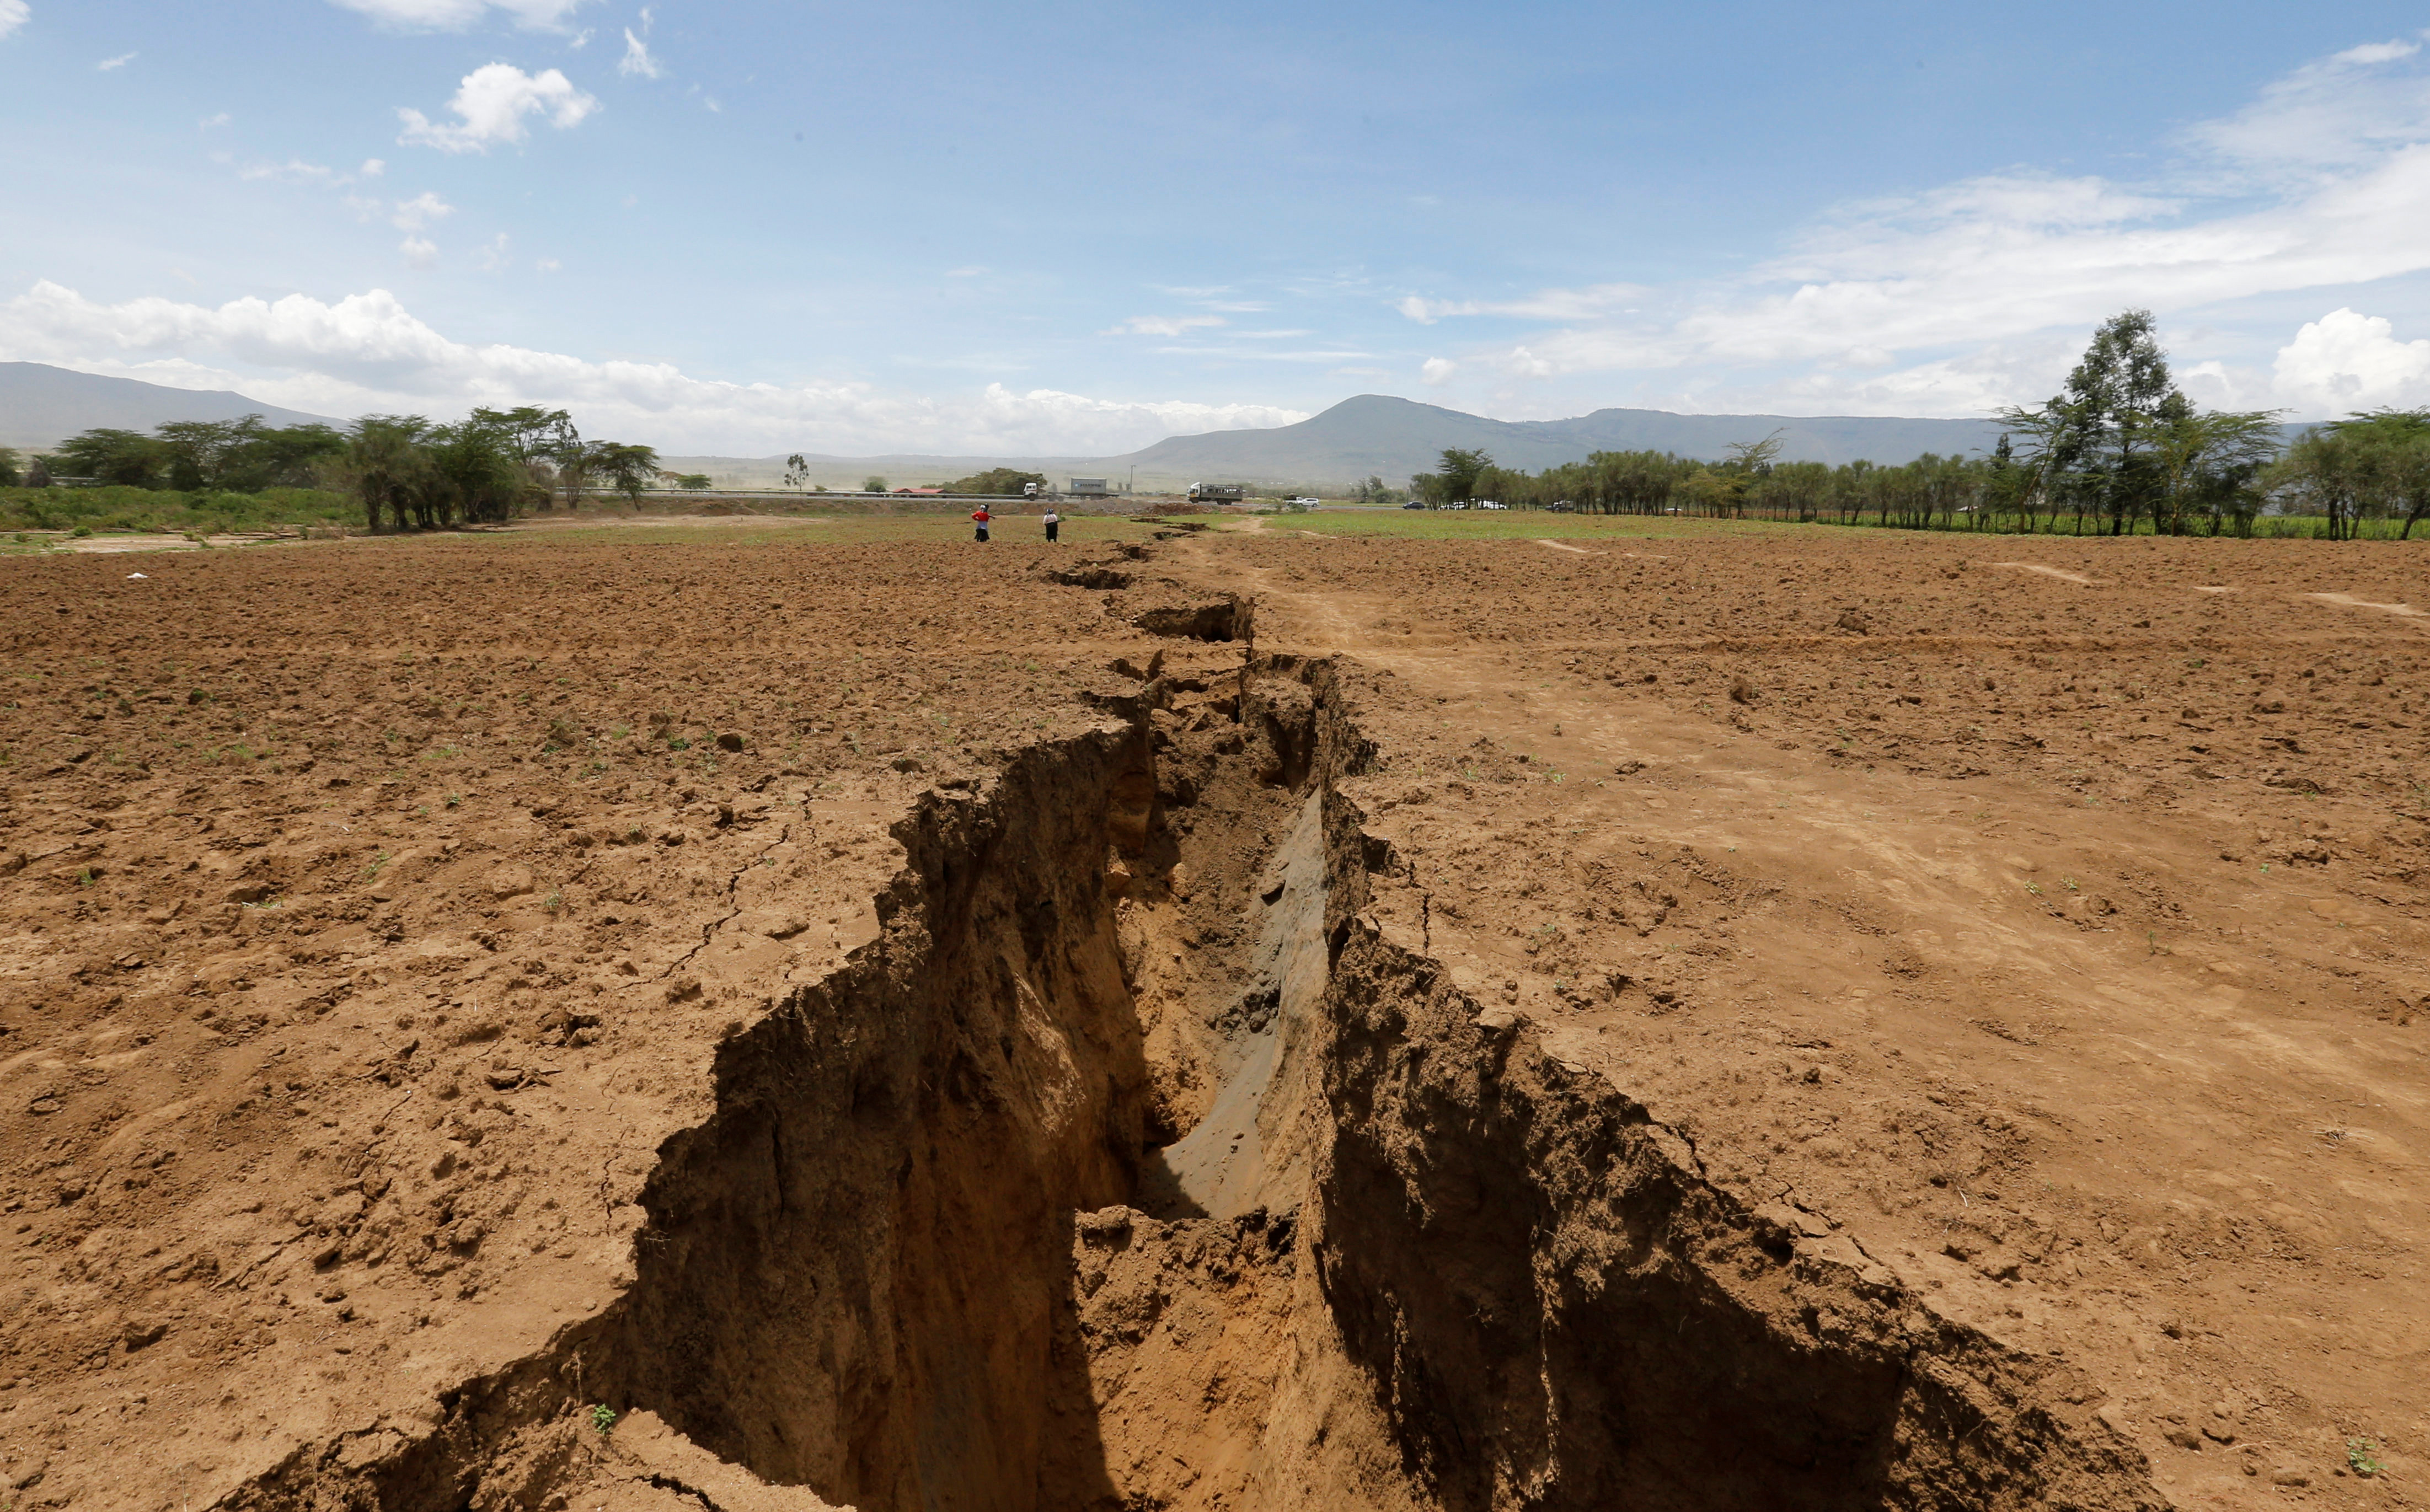 A chasm suspected to have been caused by a heavy downpour along an underground fault-line is seen near the Rift Valley town of Mai Mahiu, Kenya March 28, 2018. Picture taken March 28, 2018. REUTERS / Thomas Mukoya